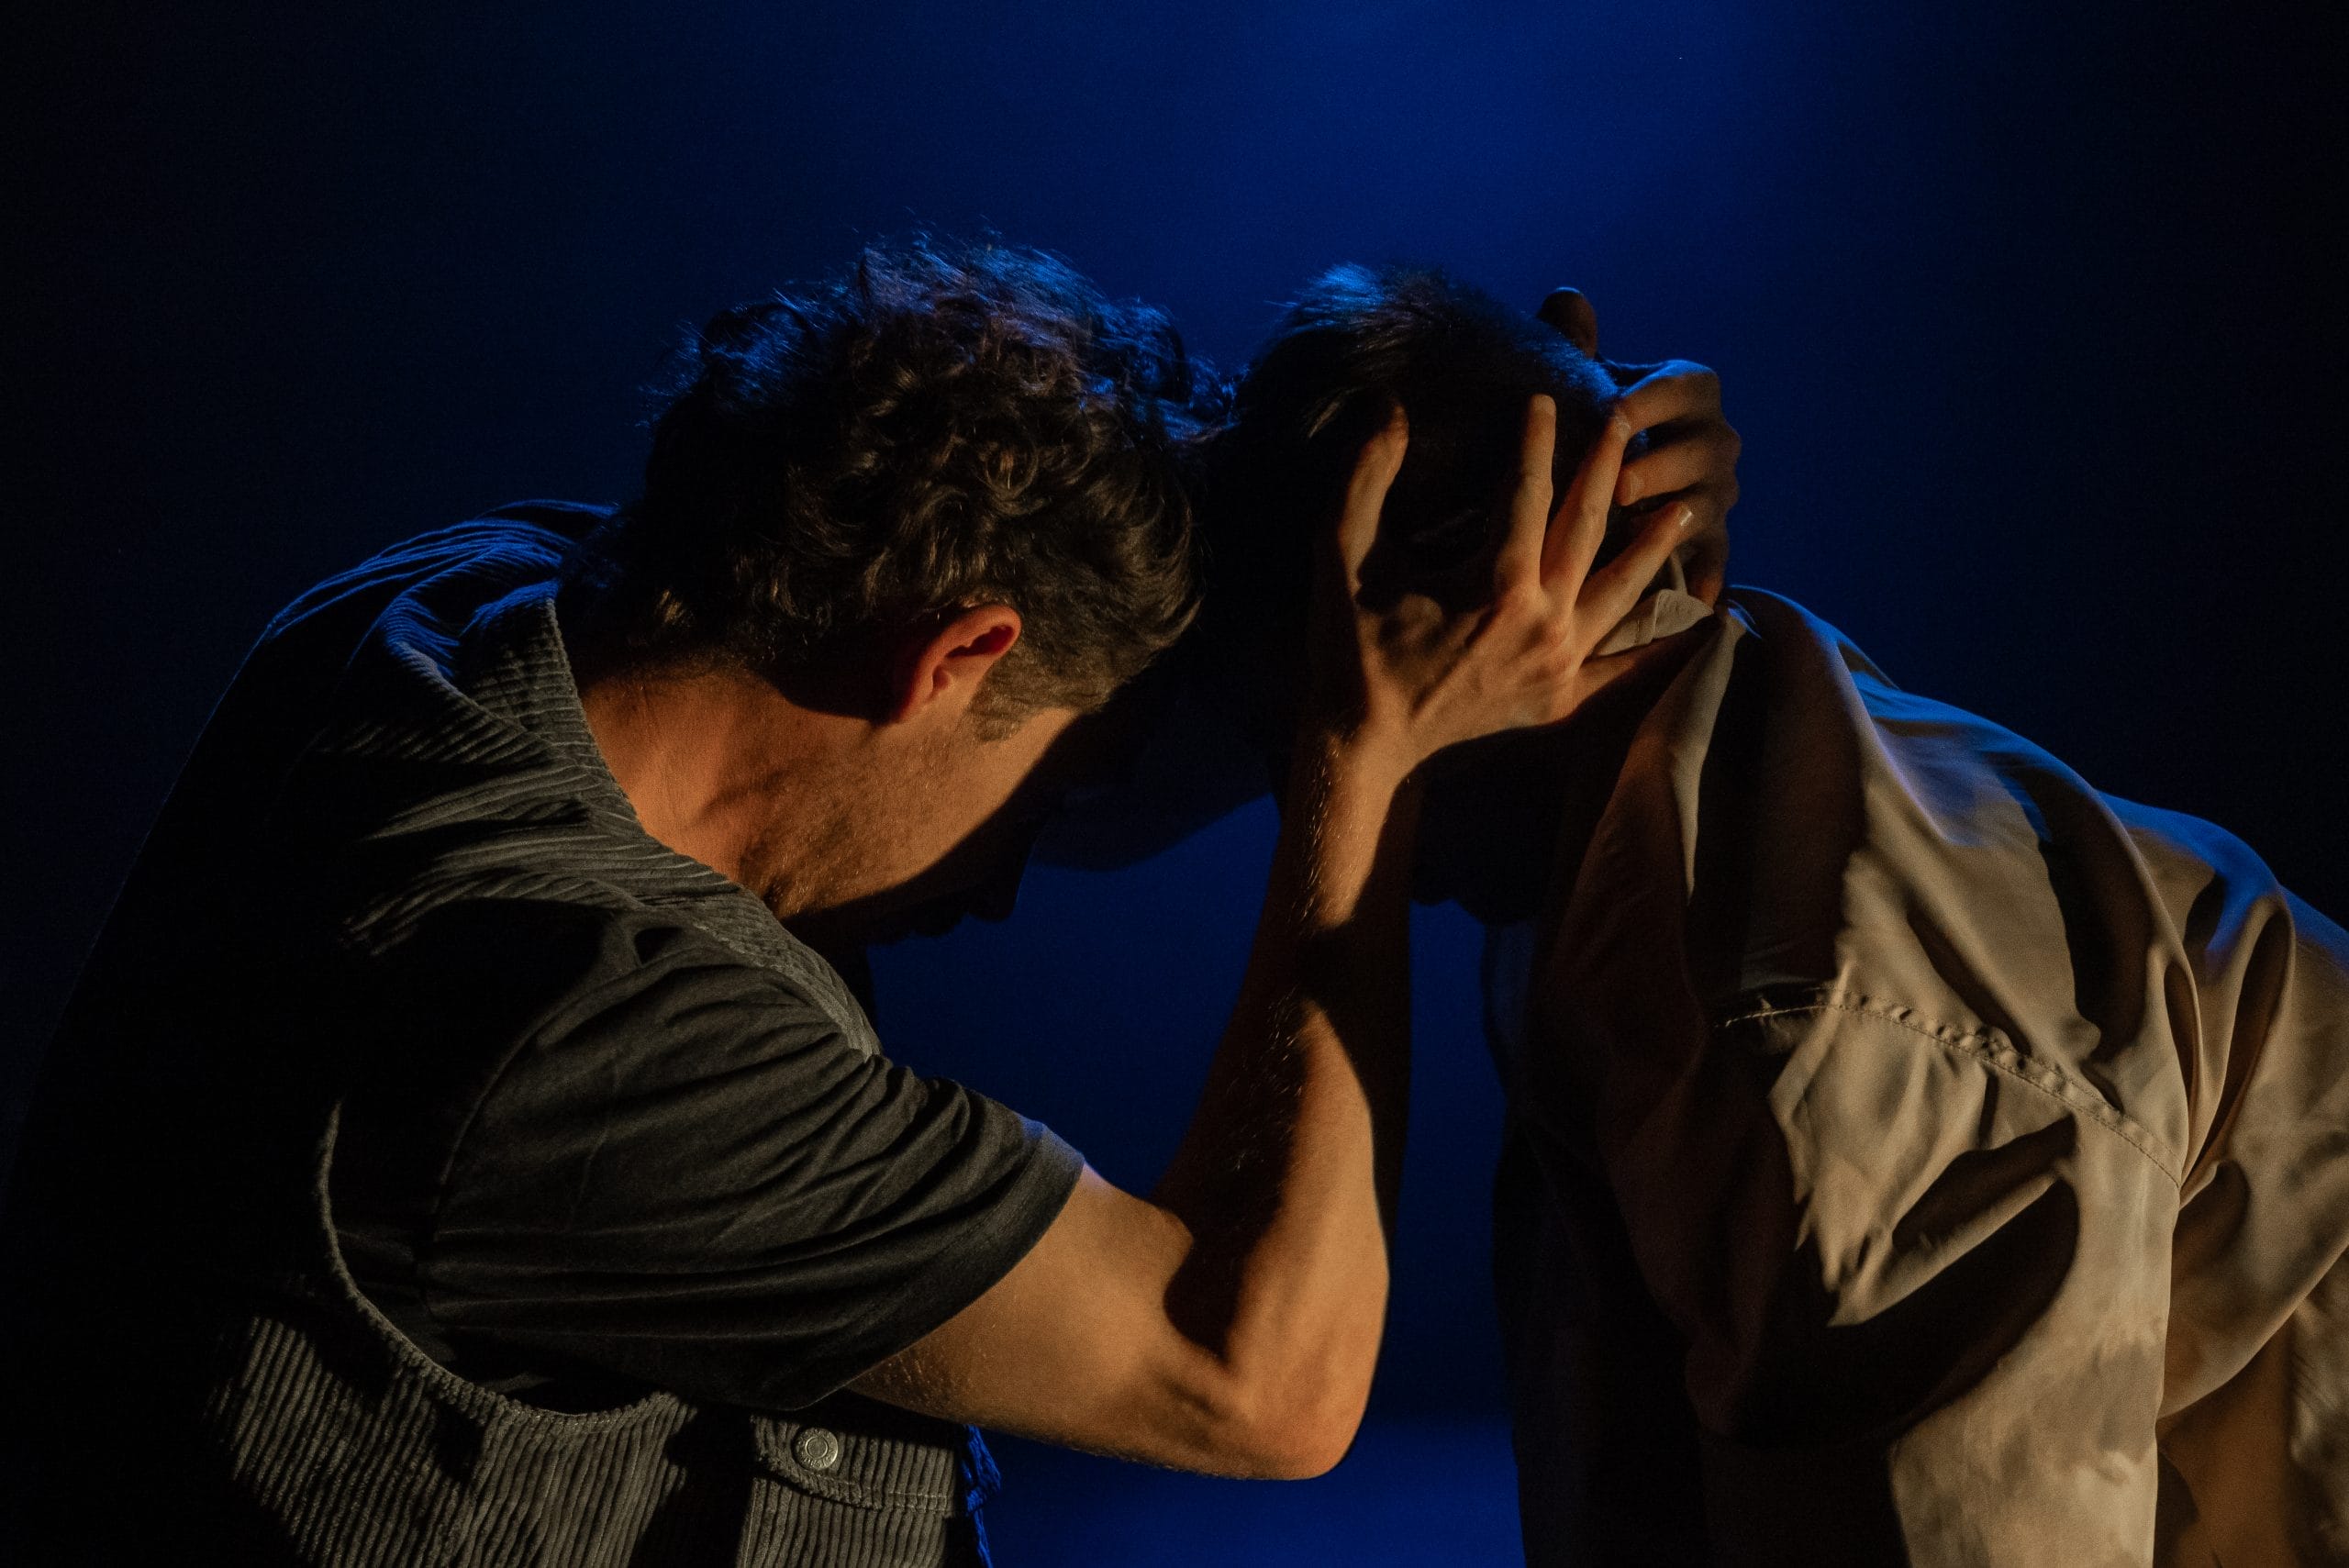 Two people perform on a dark stage. Only the back of their heads are visible and one holds the other's head in his hands.